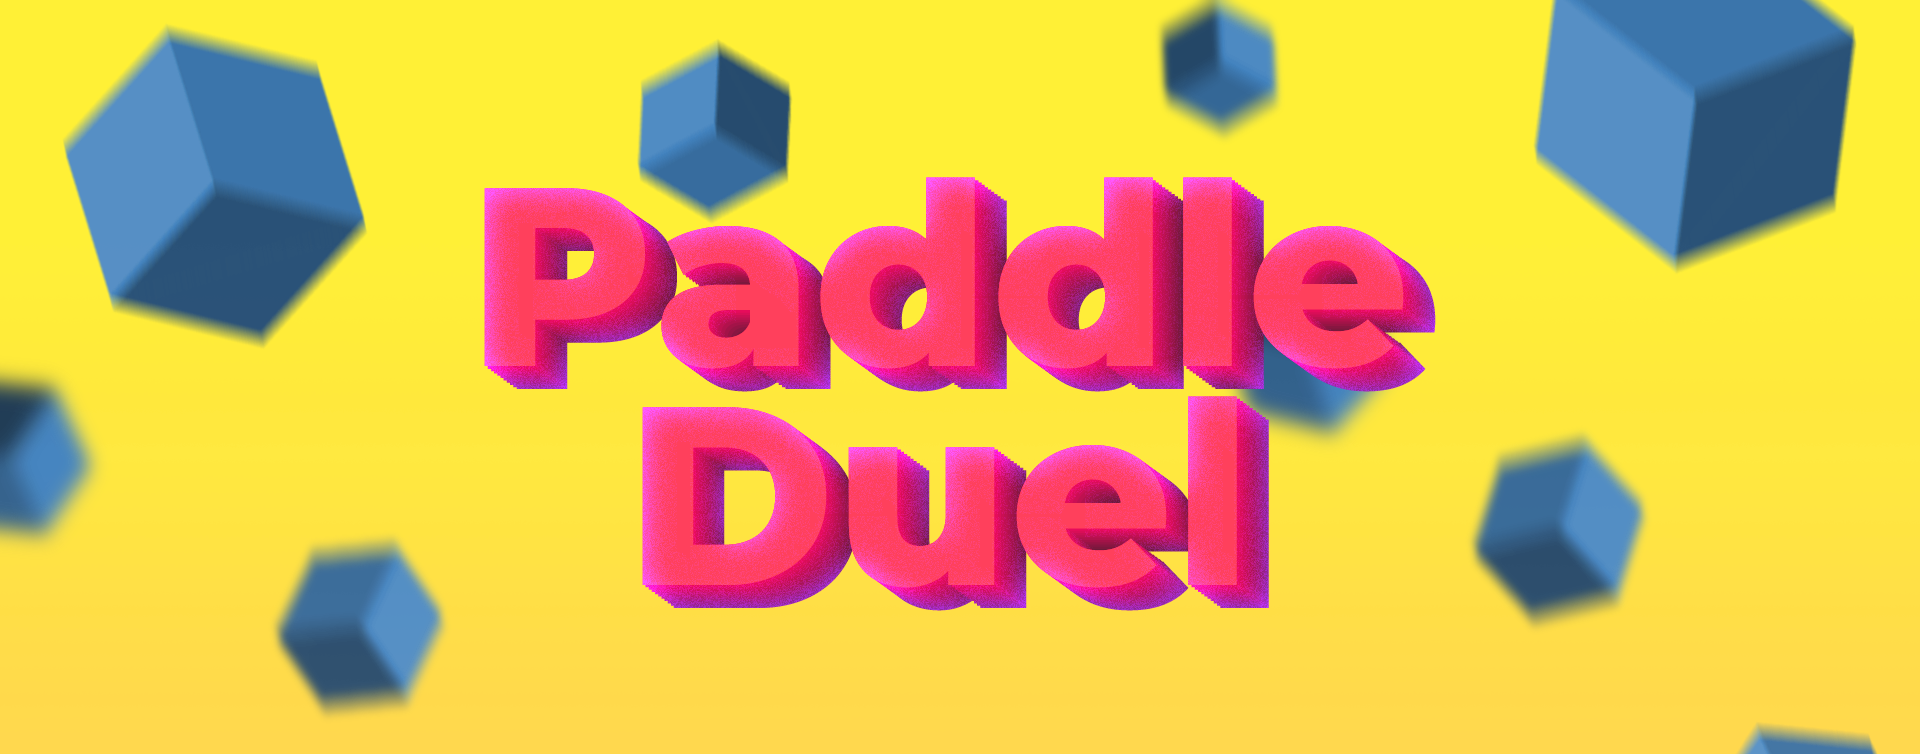 Paddle Duel